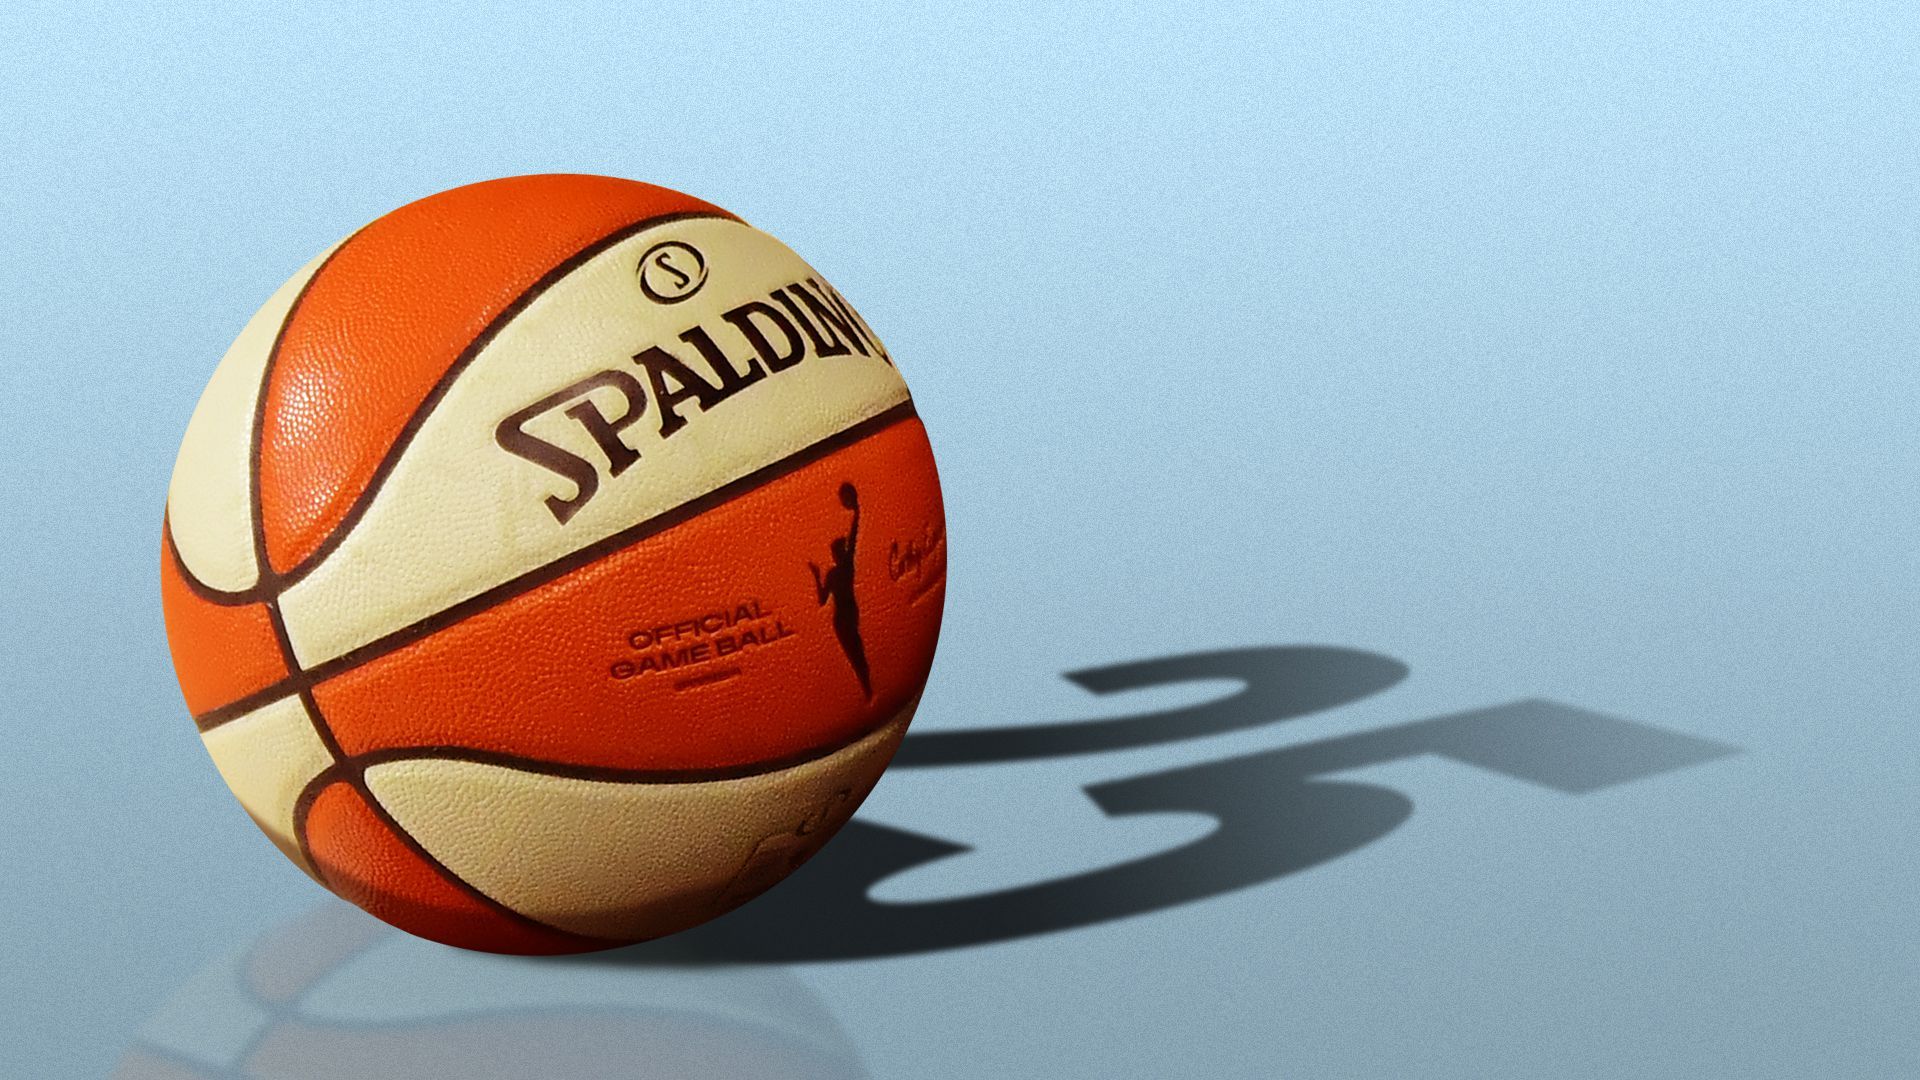 Illustration of a WNBA basketball casting a shadow that reads "25"